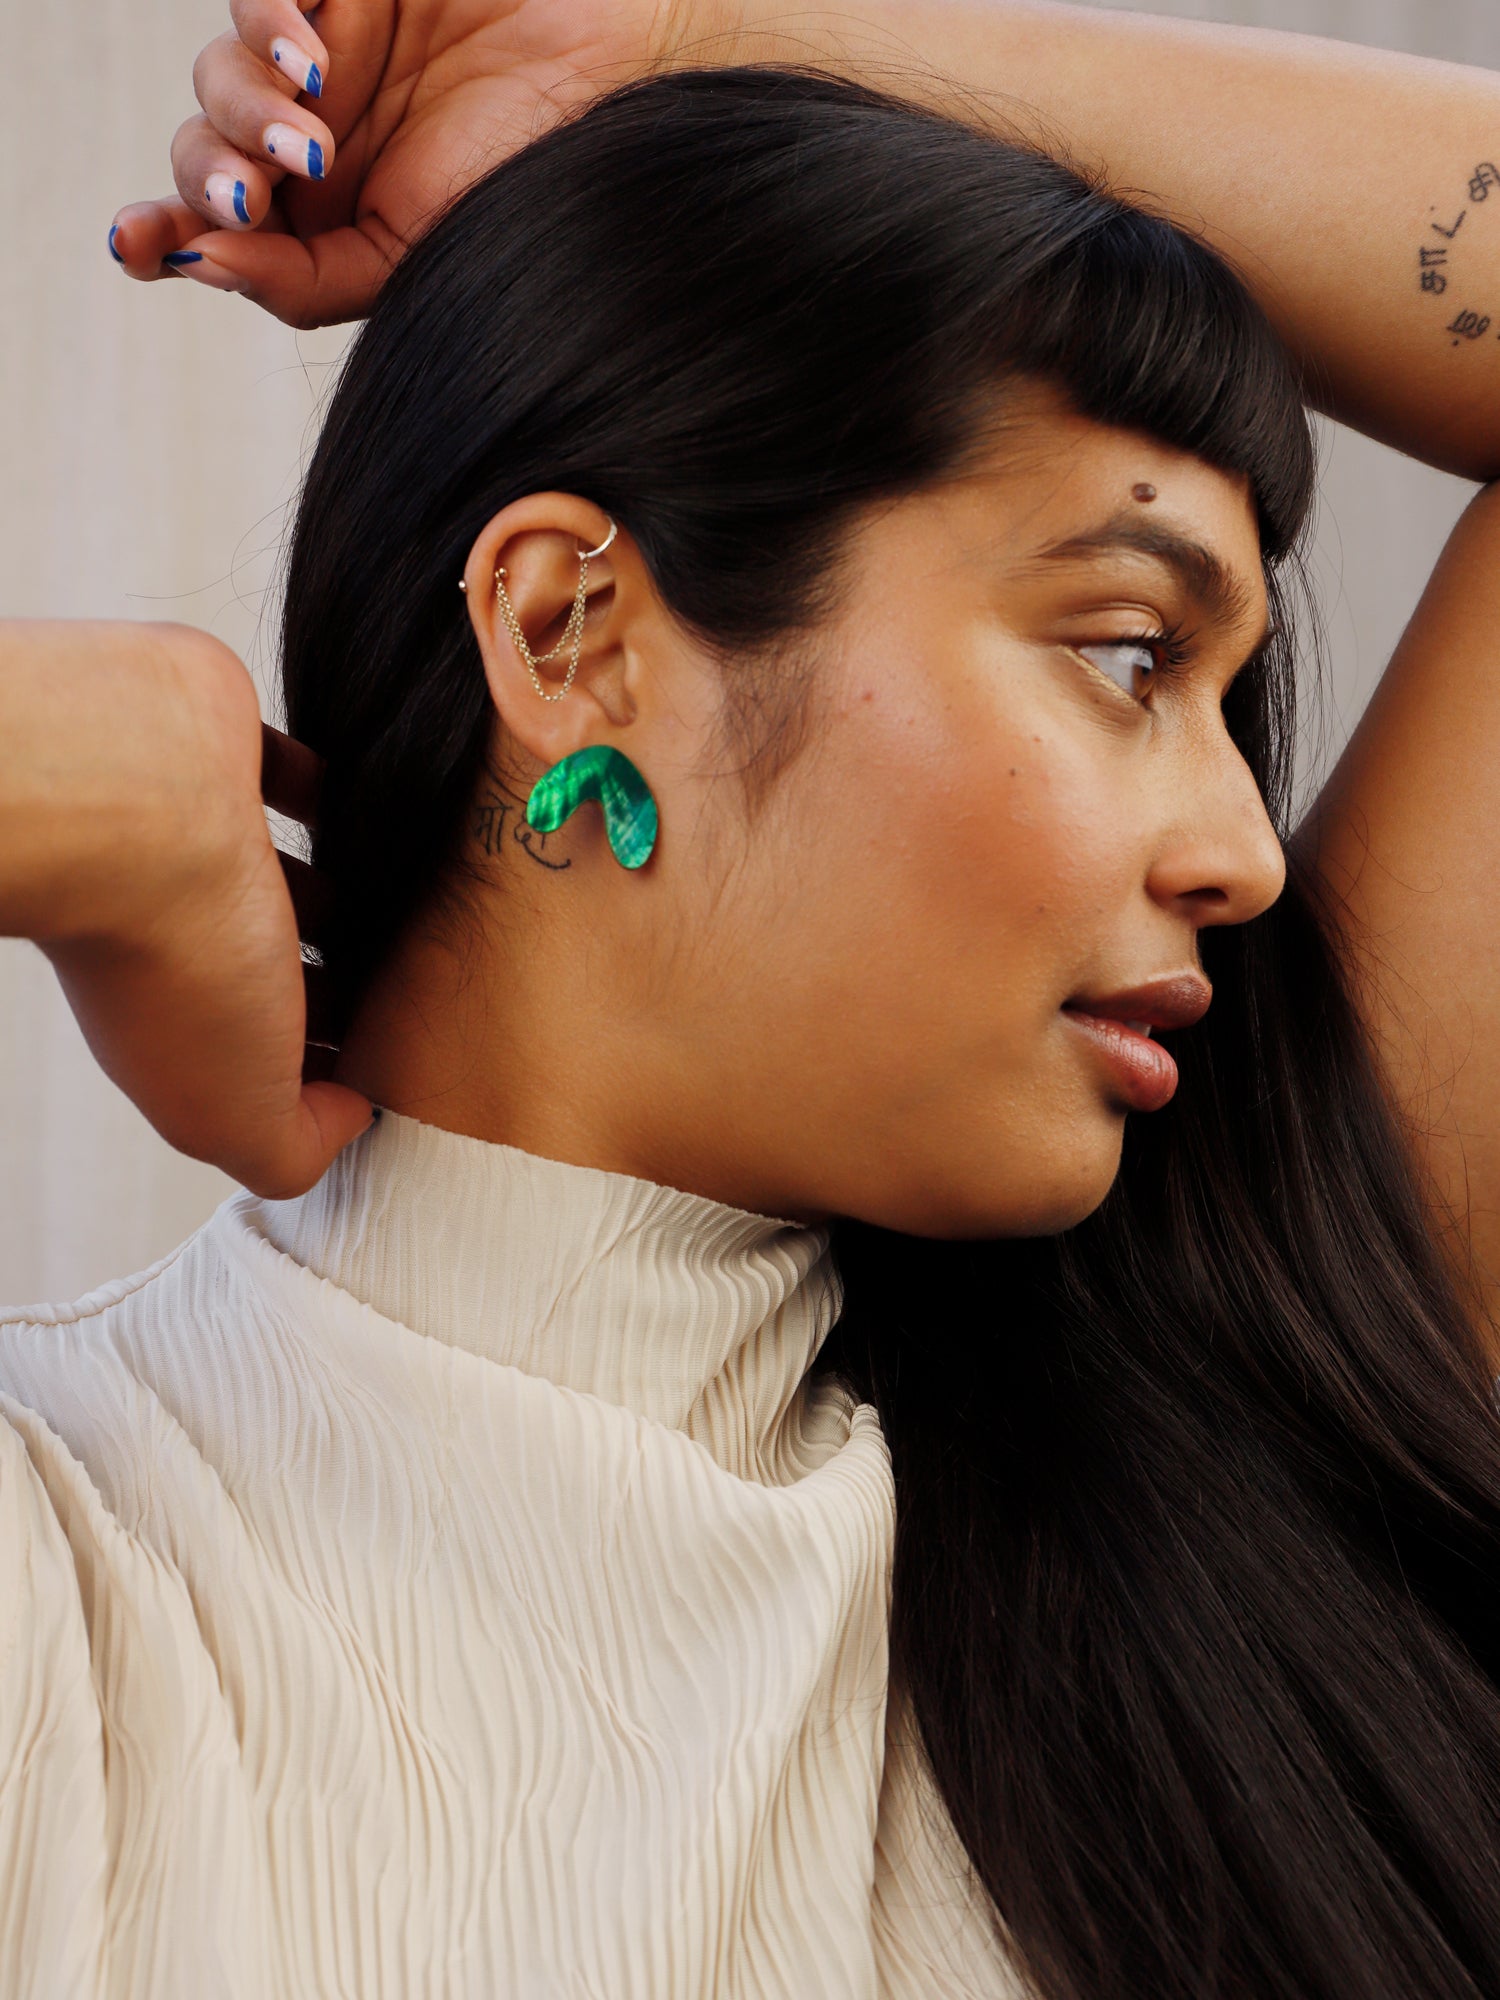 Cassia Studs in Emerald. Sophisticated everyday studs made with FSC approved wood and emerald tone mother of pearl. Made in the UK by Wolf & Moon.